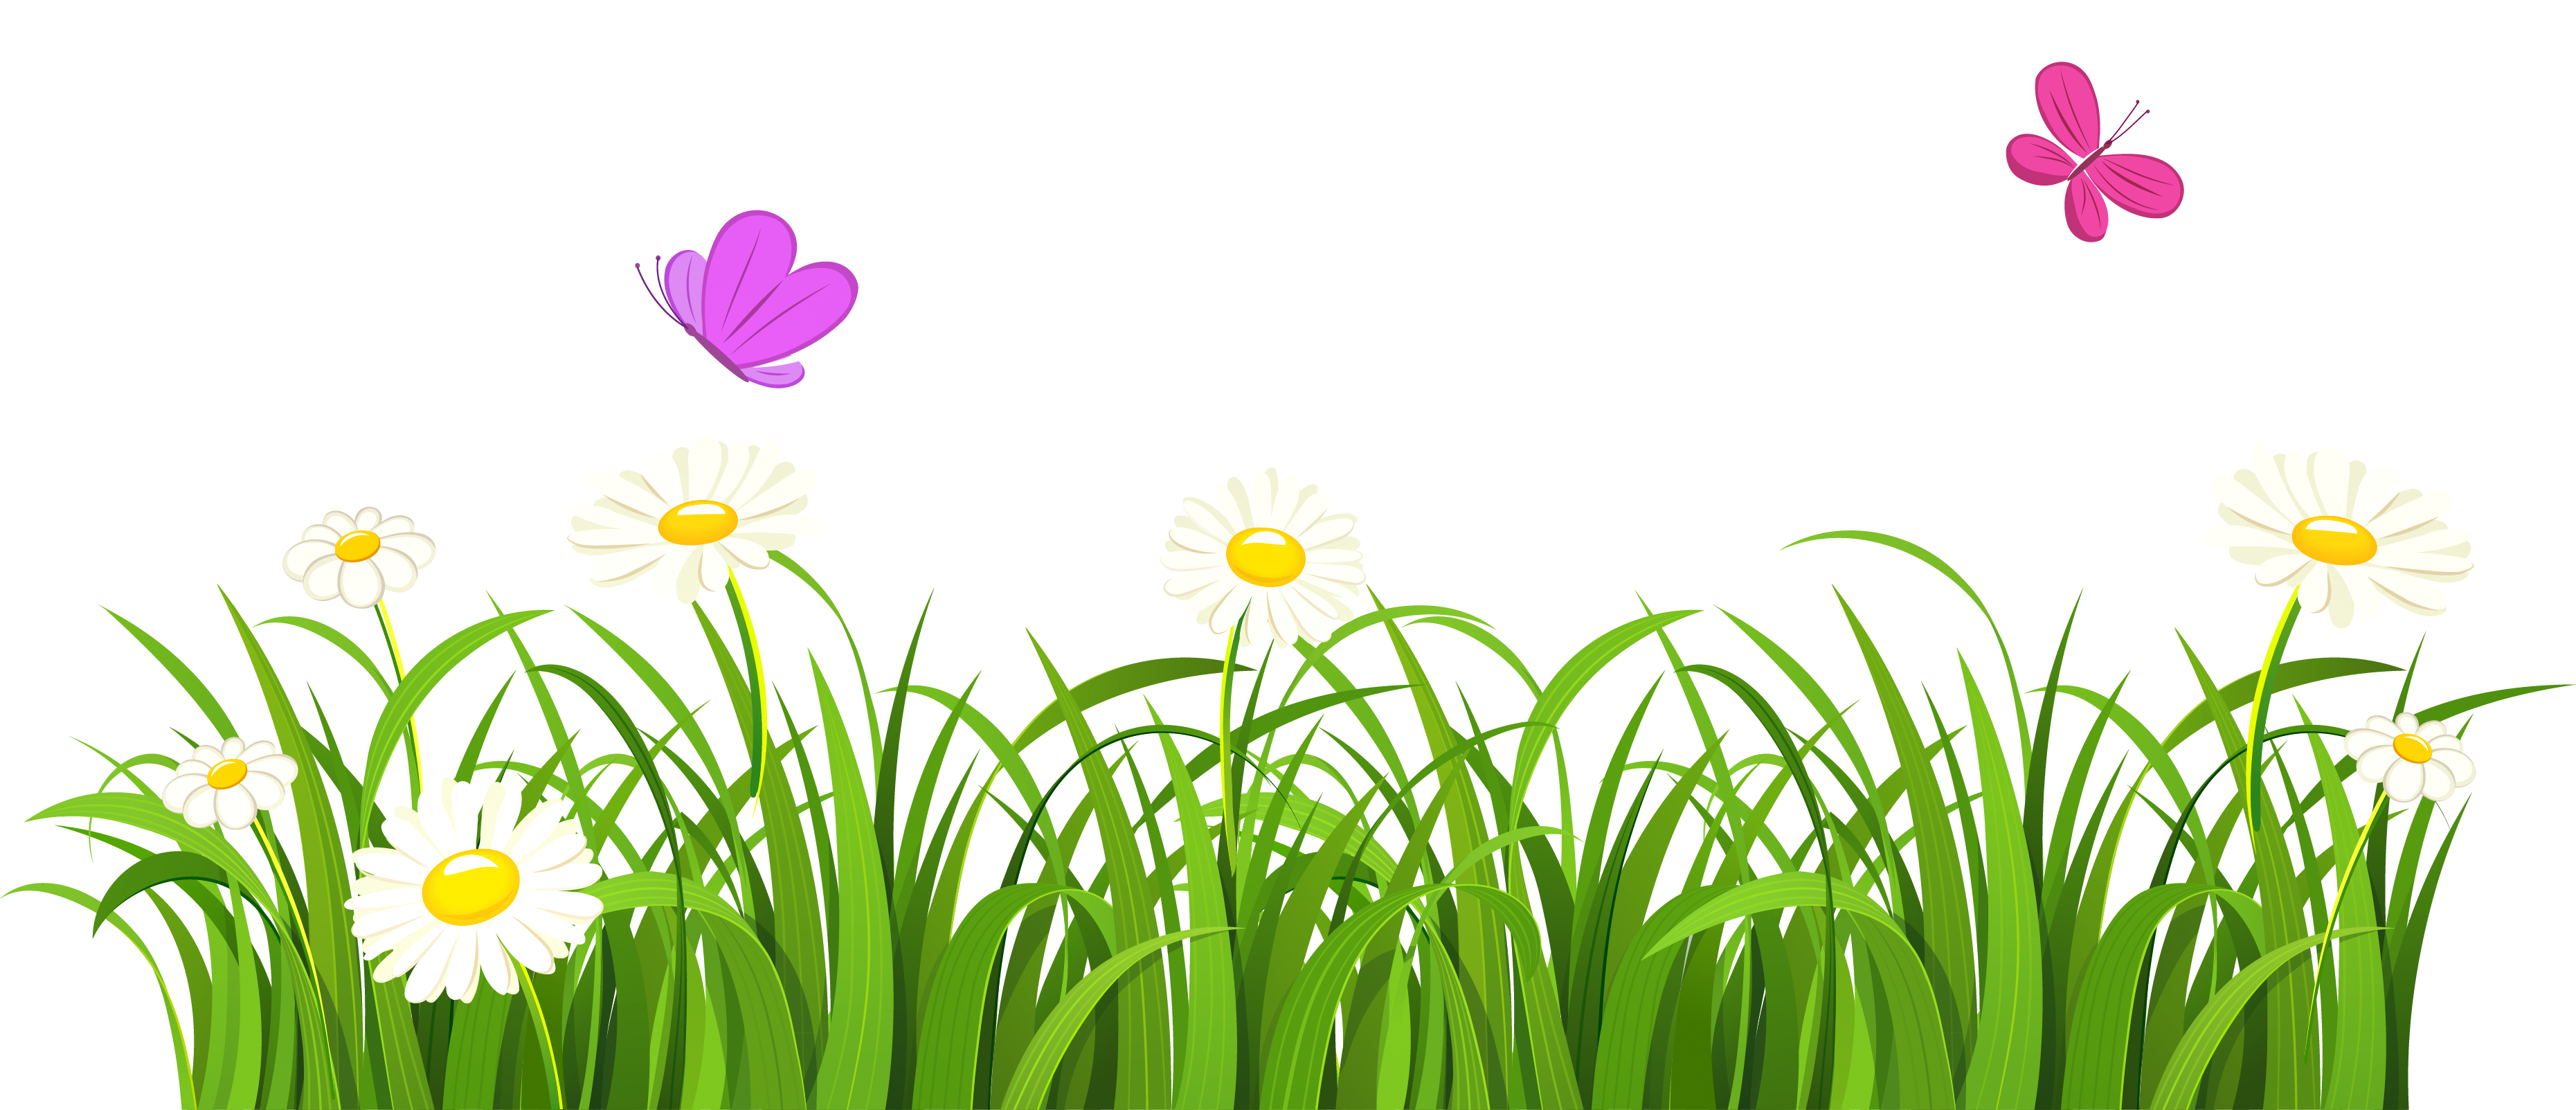 Clip art grass clipart cliparts for you 2